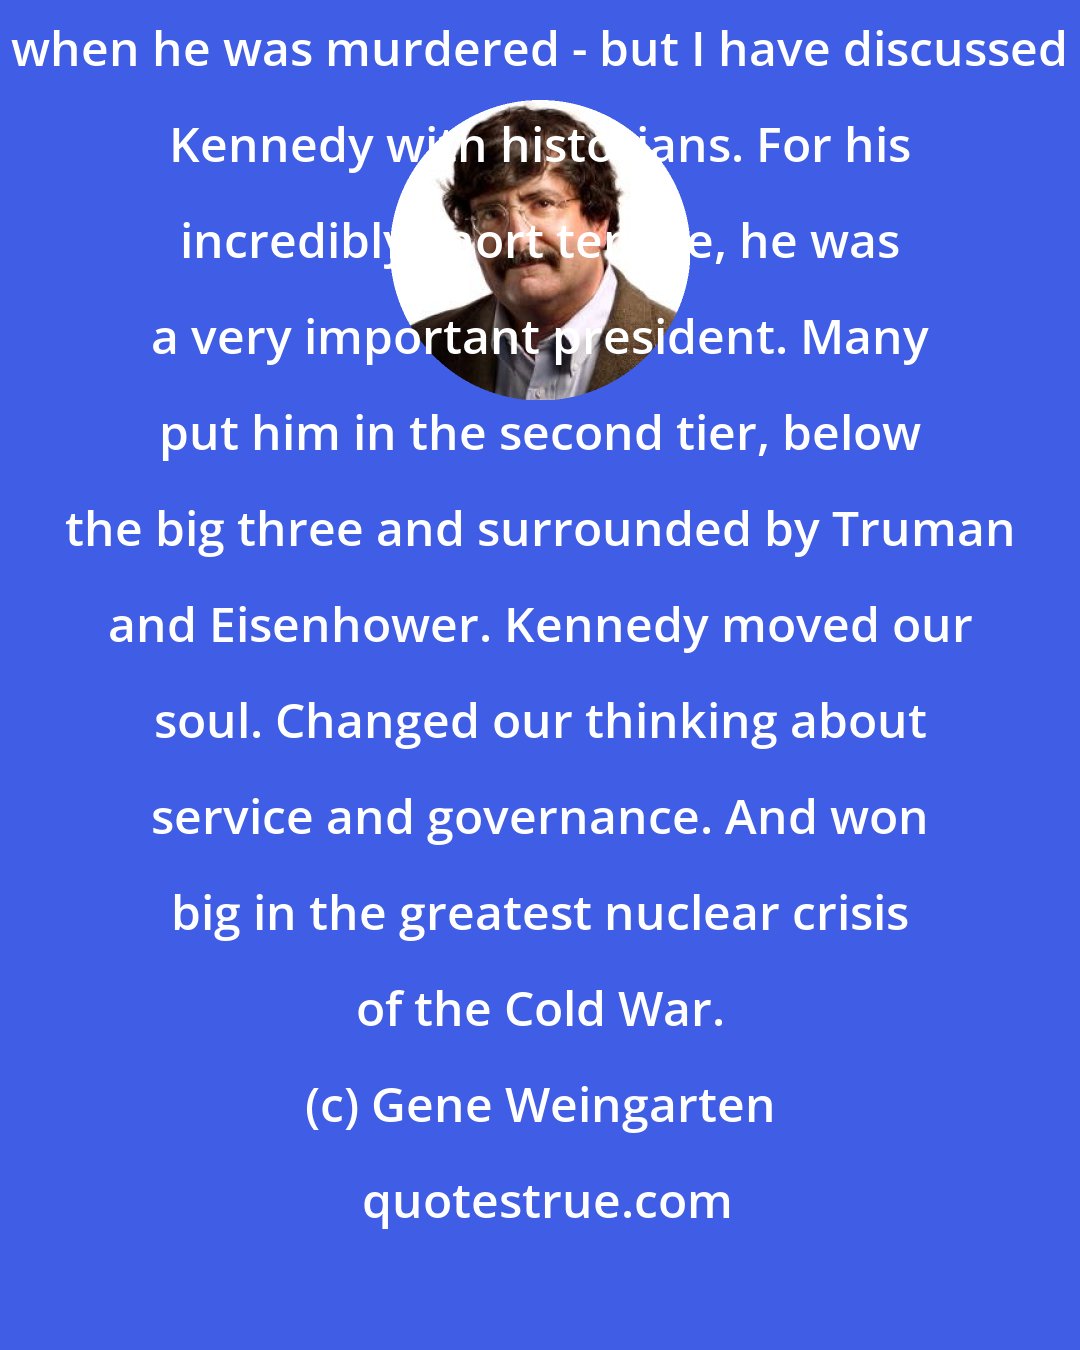 Gene Weingarten: You know, I am not a particular Kennedy apologist or an awed fan - I was 12 when he was murdered - but I have discussed Kennedy with historians. For his incredibly short tenure, he was a very important president. Many put him in the second tier, below the big three and surrounded by Truman and Eisenhower. Kennedy moved our soul. Changed our thinking about service and governance. And won big in the greatest nuclear crisis of the Cold War.